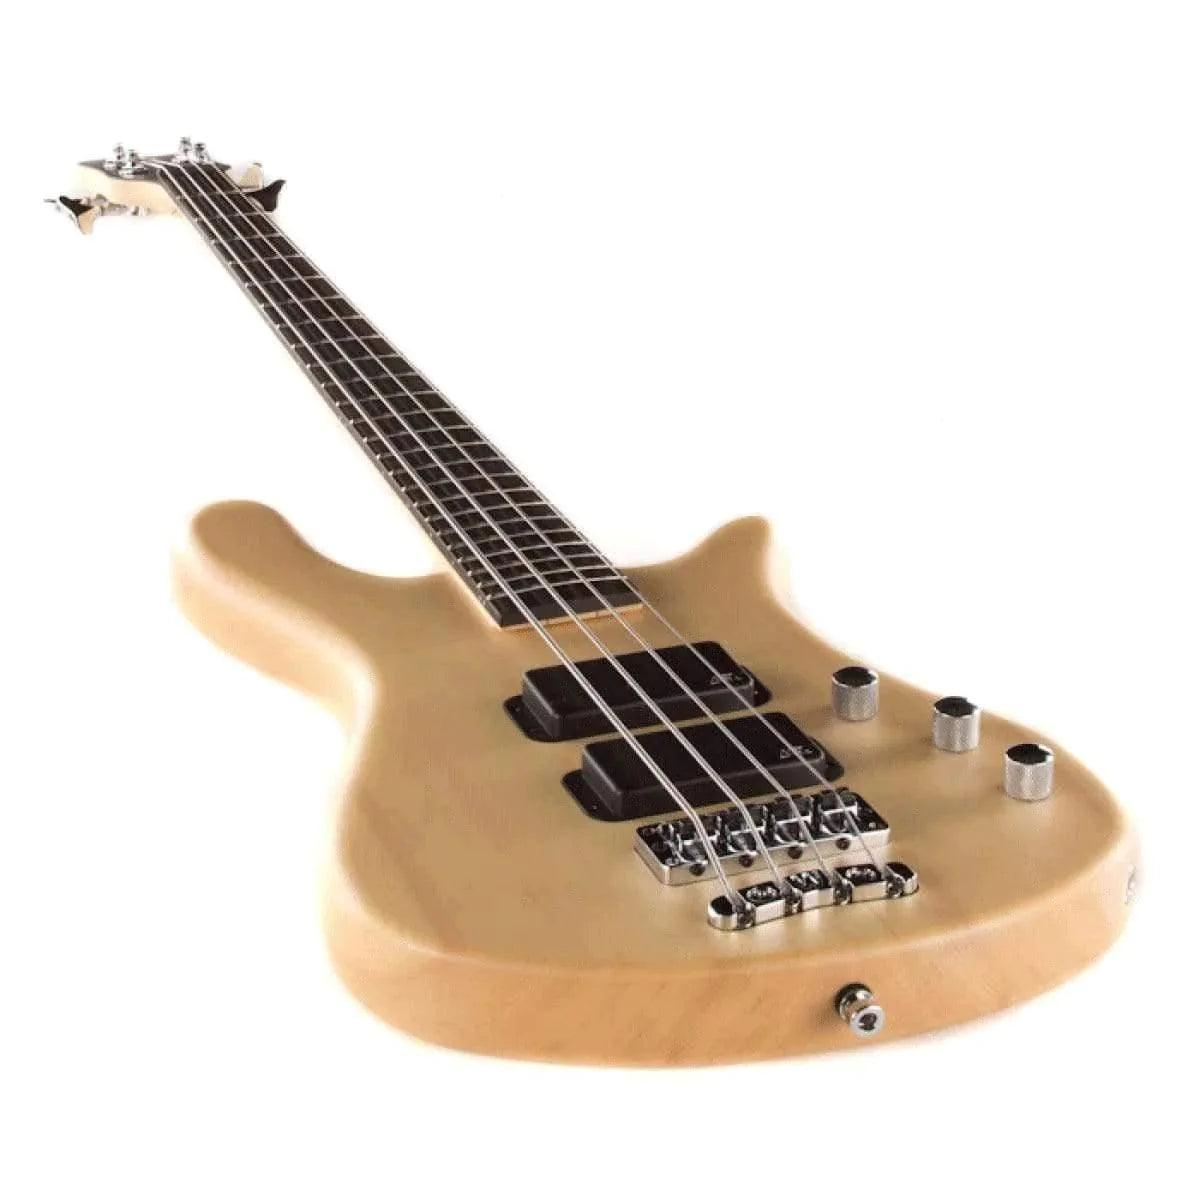 Warwick RB Streamer Standard 4-string Electric Bass - Natural Satin (Discontinued)